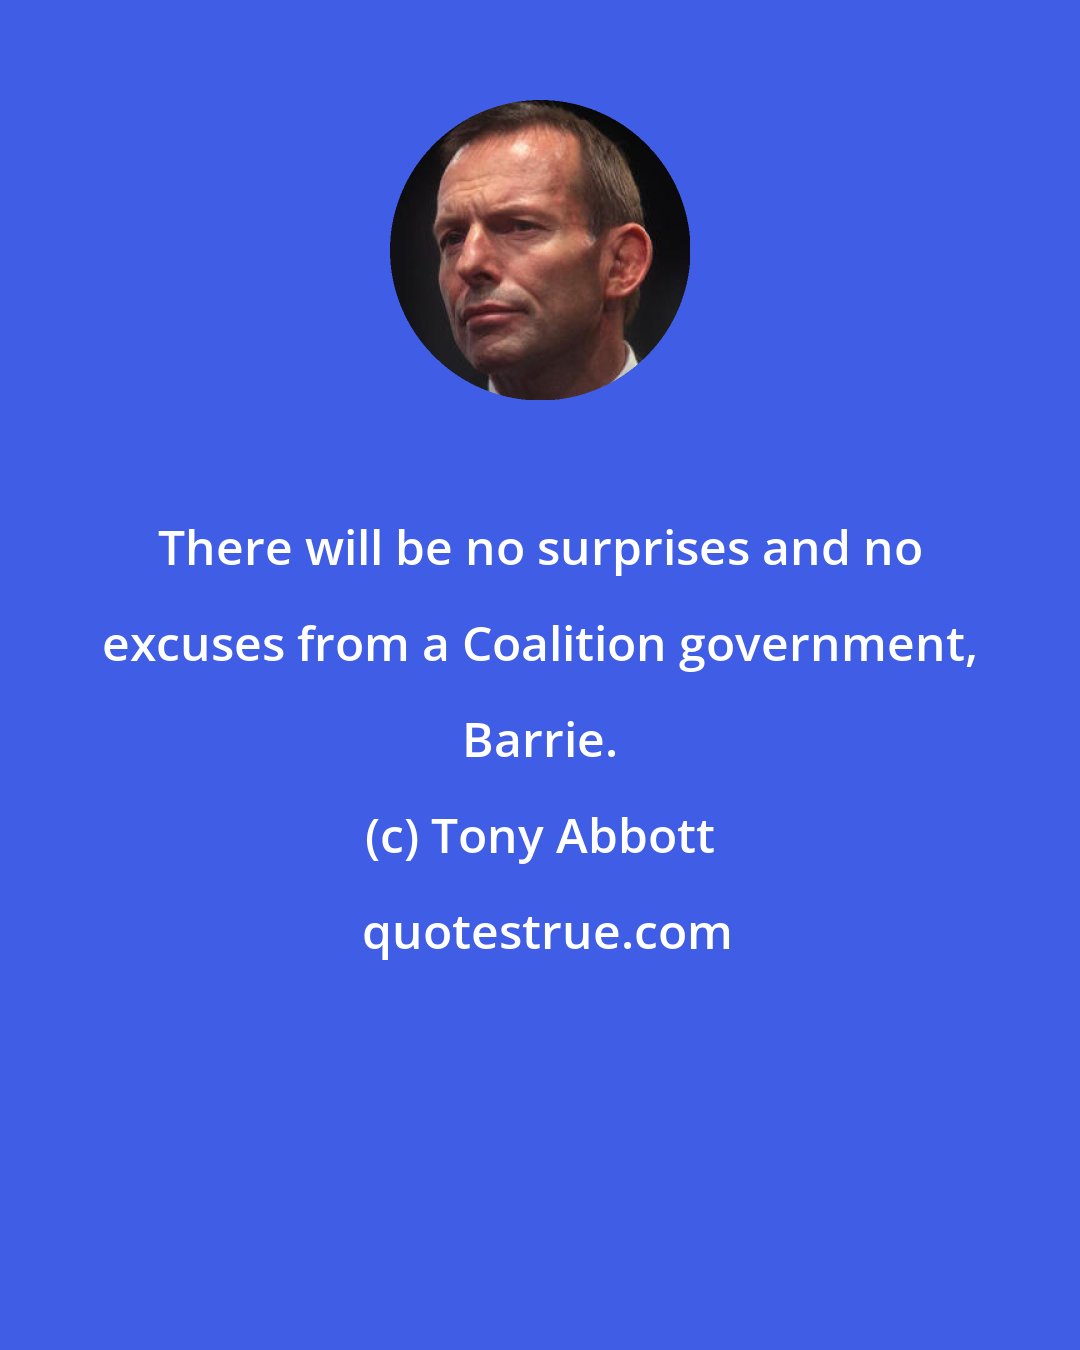 Tony Abbott: There will be no surprises and no excuses from a Coalition government, Barrie.